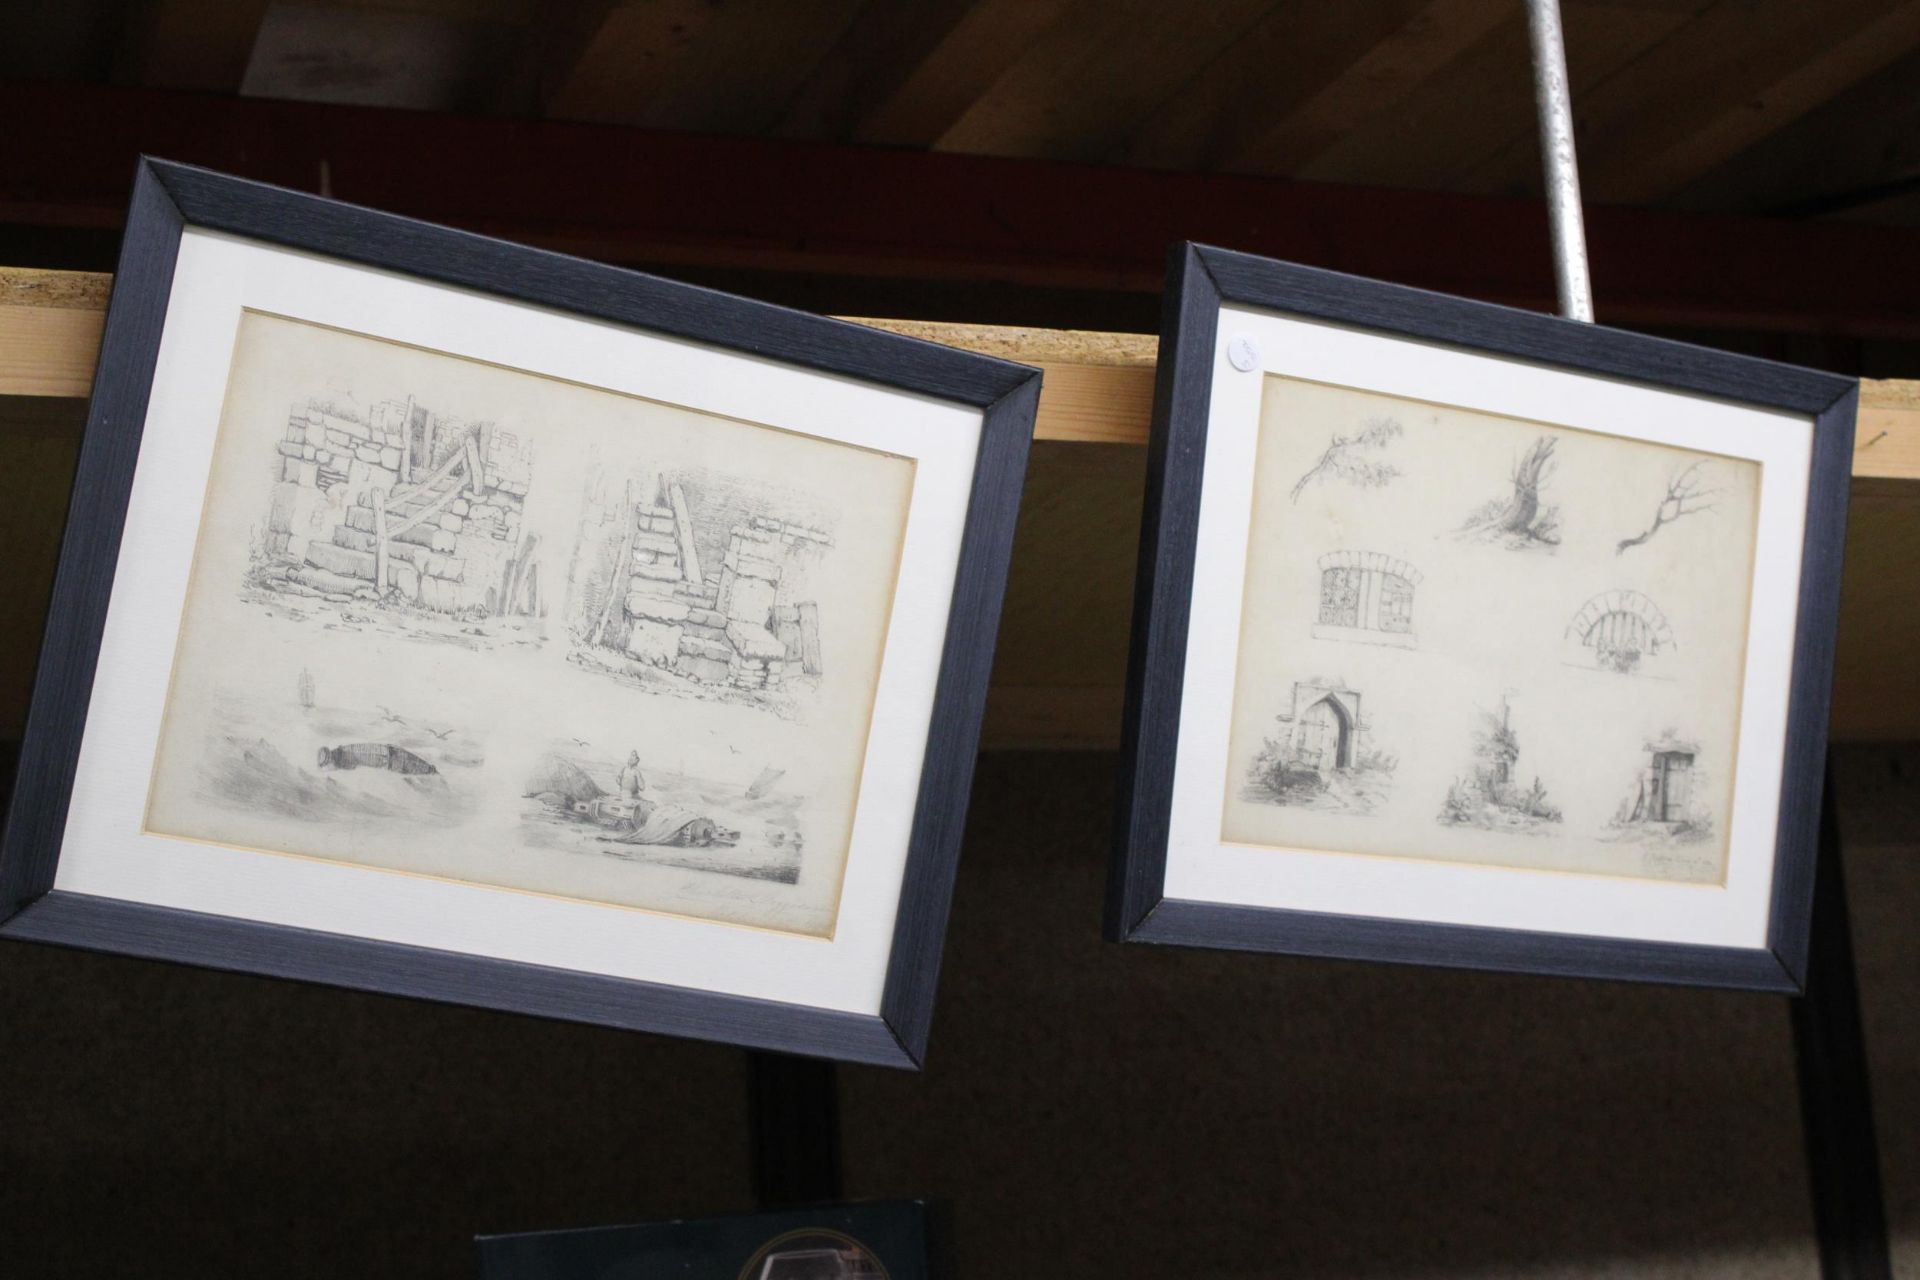 SIX "OVER PENCILED" PRINTS FEATURING SEA SCENES, DOORS, WATERFALLS, STEPS, CHURCHES ETC - Image 2 of 3